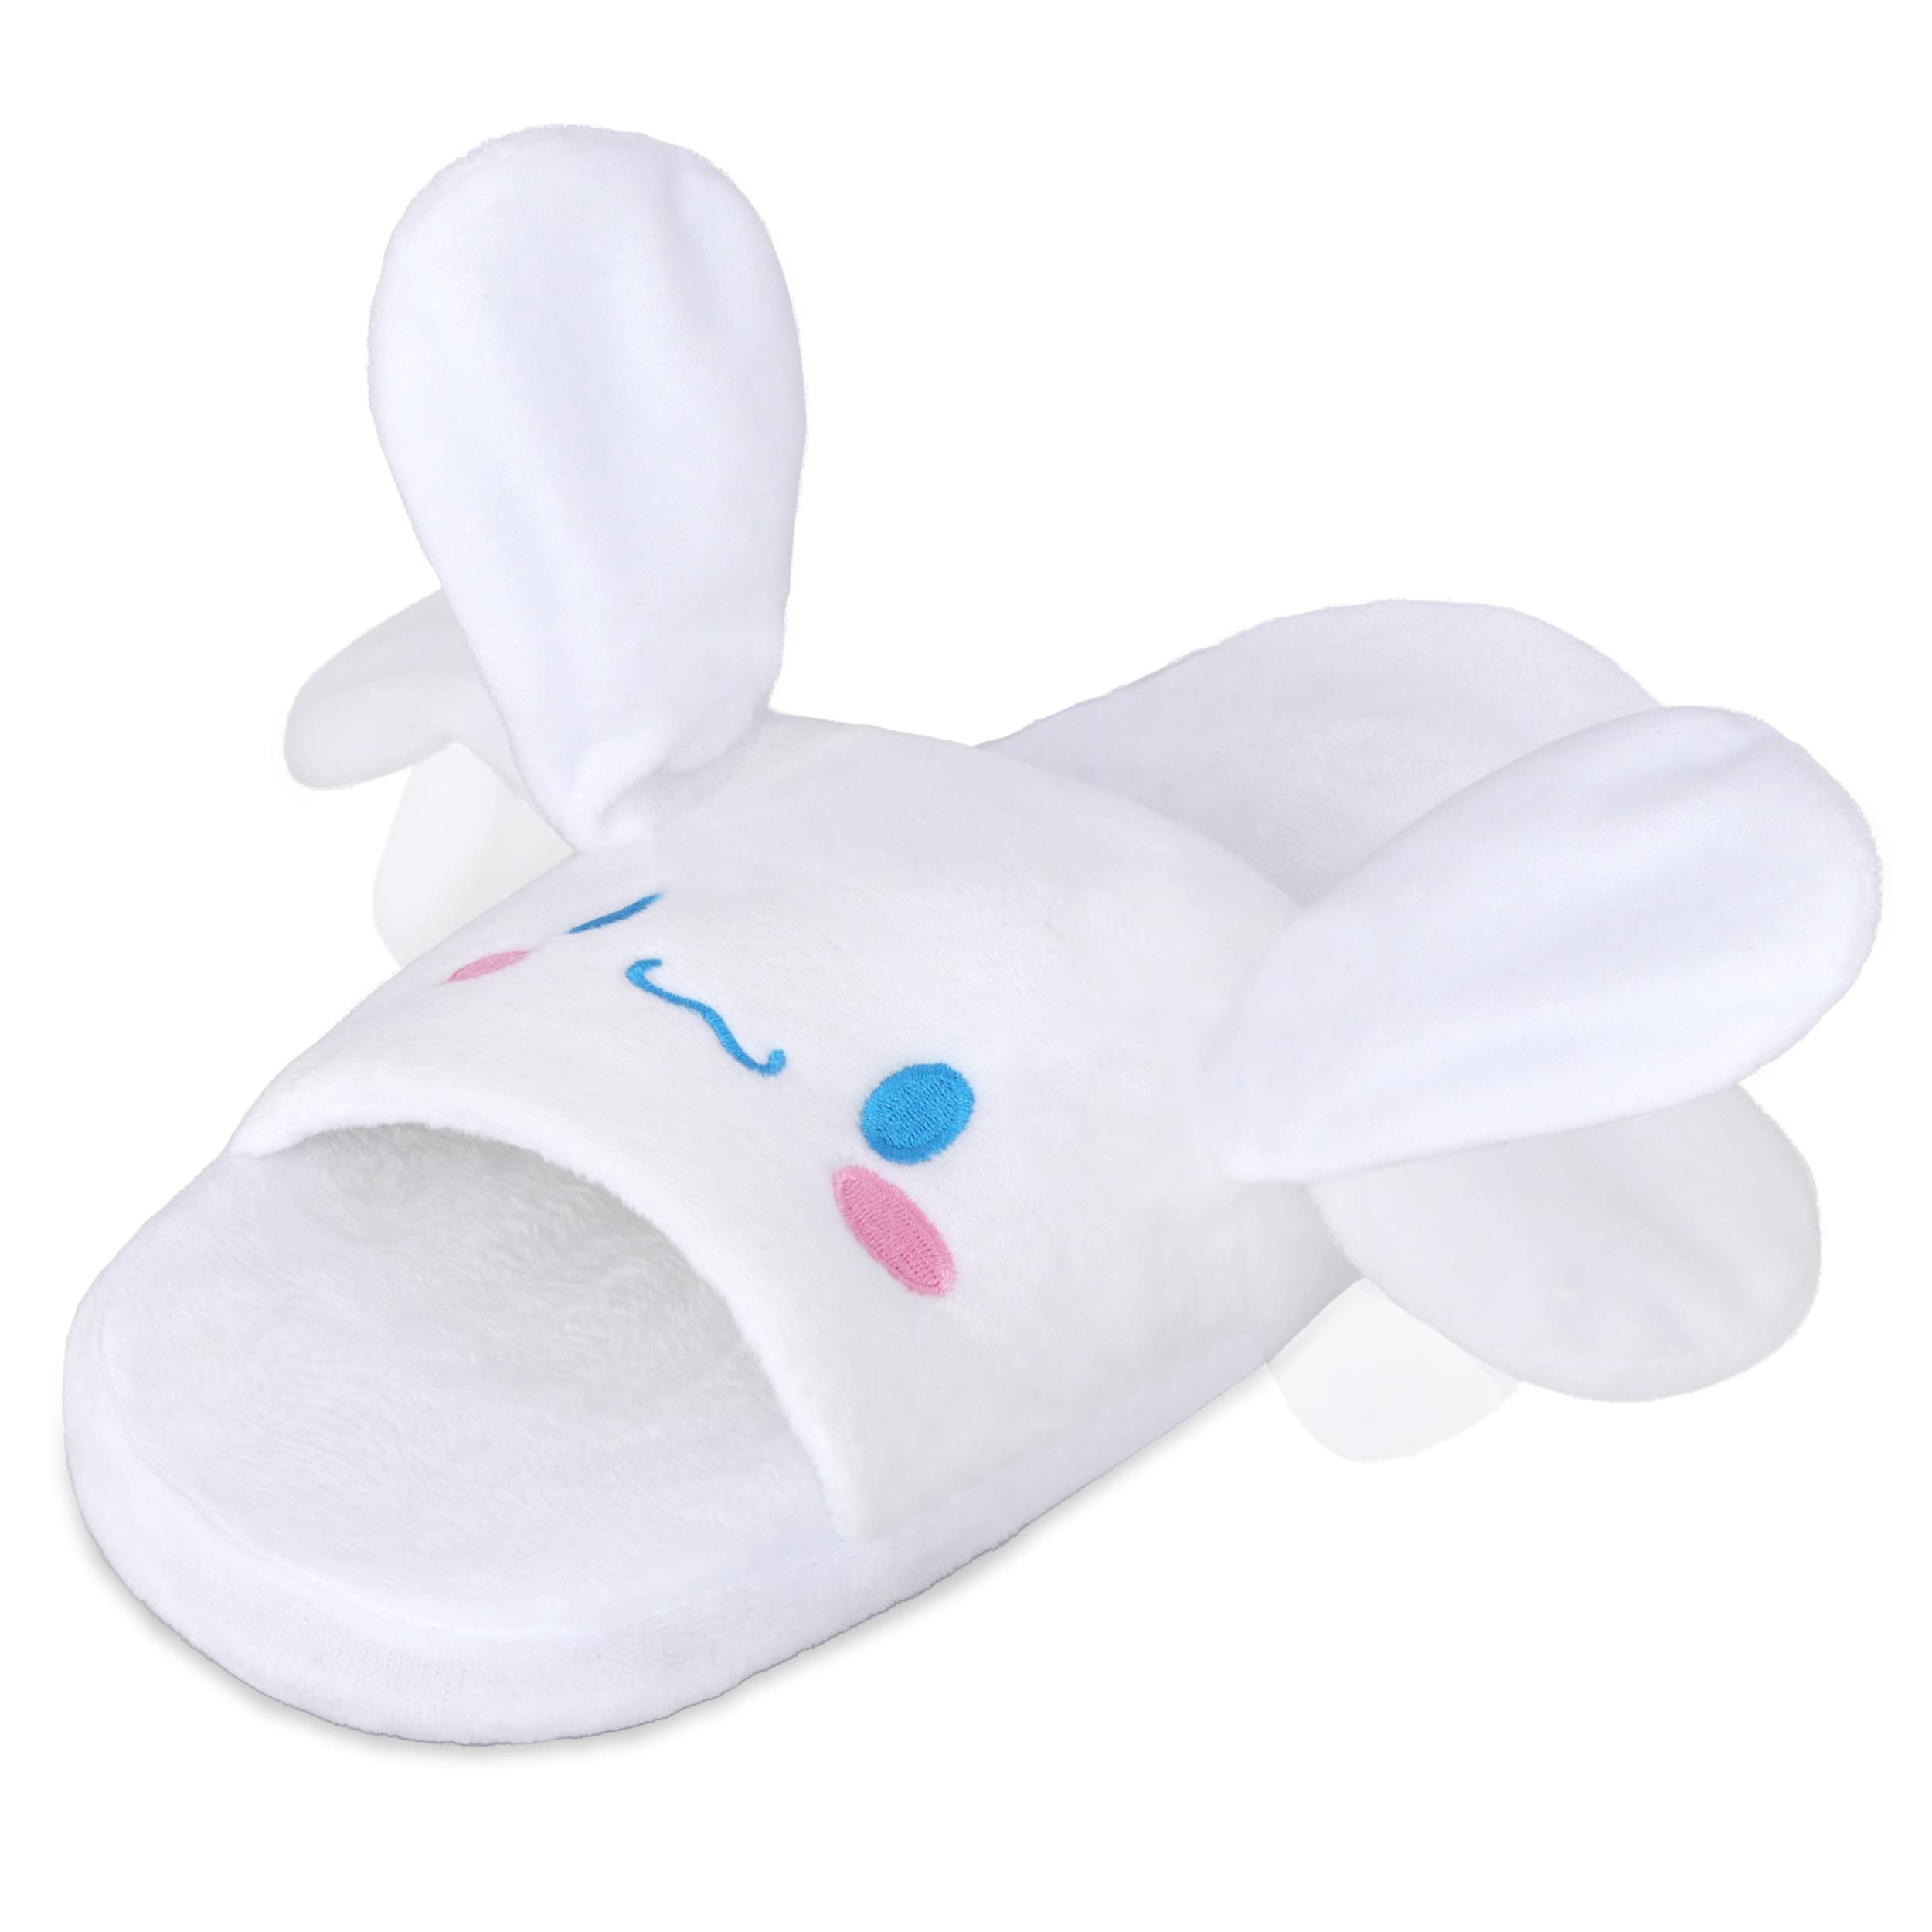 Roffatide Anime Cinnamoroll Fuzzy Slippers White Dog House Slippers Open Toe Open Back FoamEar Moving Jumping Slippers with Rubber Sole for Women Man One Size